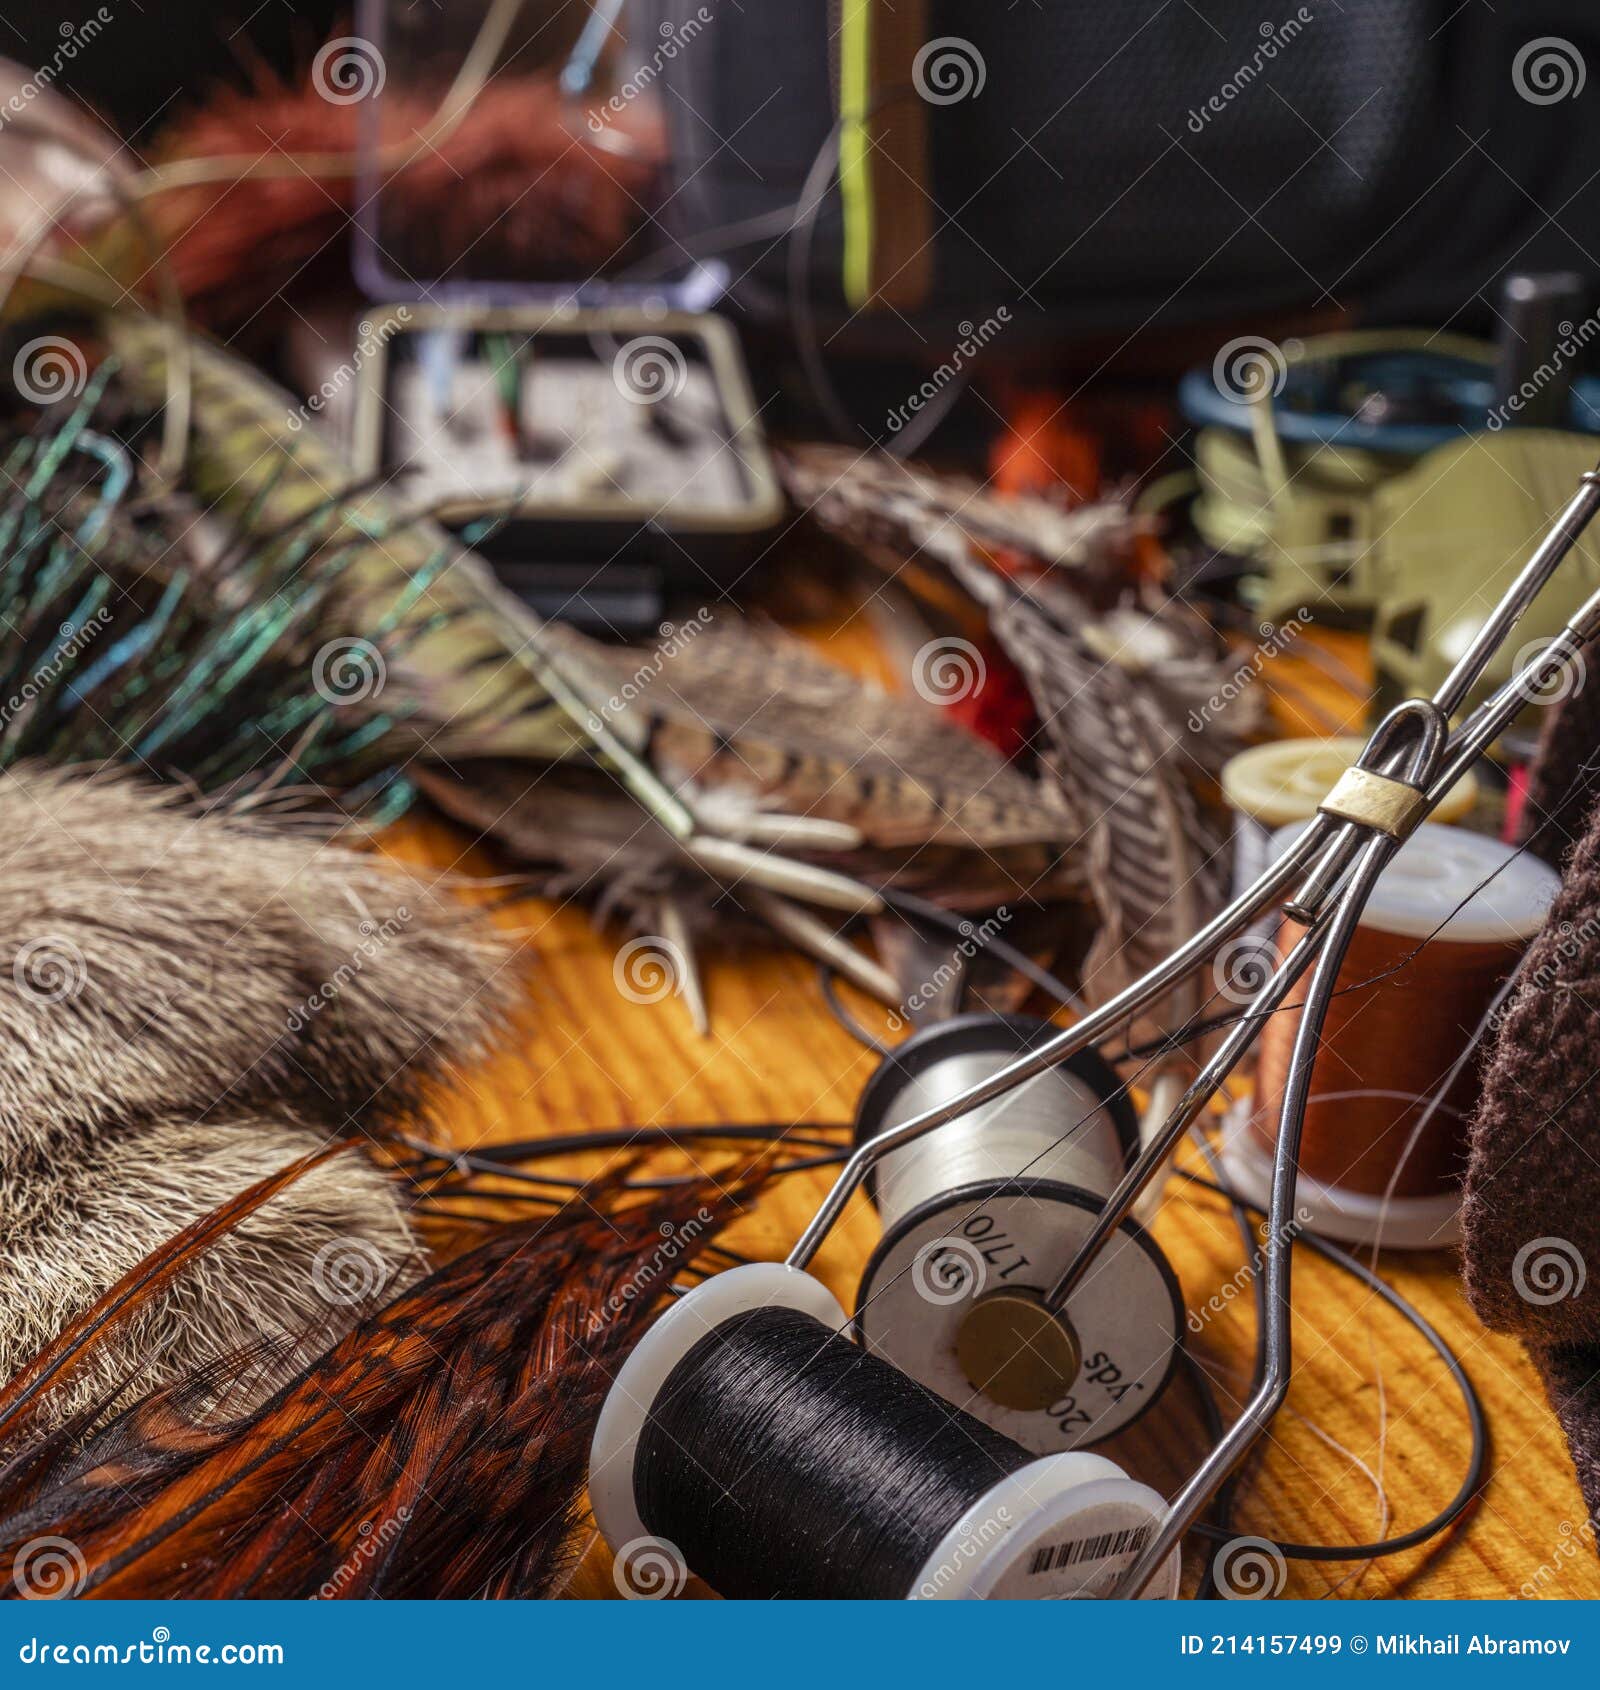 Materials and Tools for Tying Lures on a Wooden Table. Fly Fishing Still  Life Stock Image - Image of brown, color: 214157499